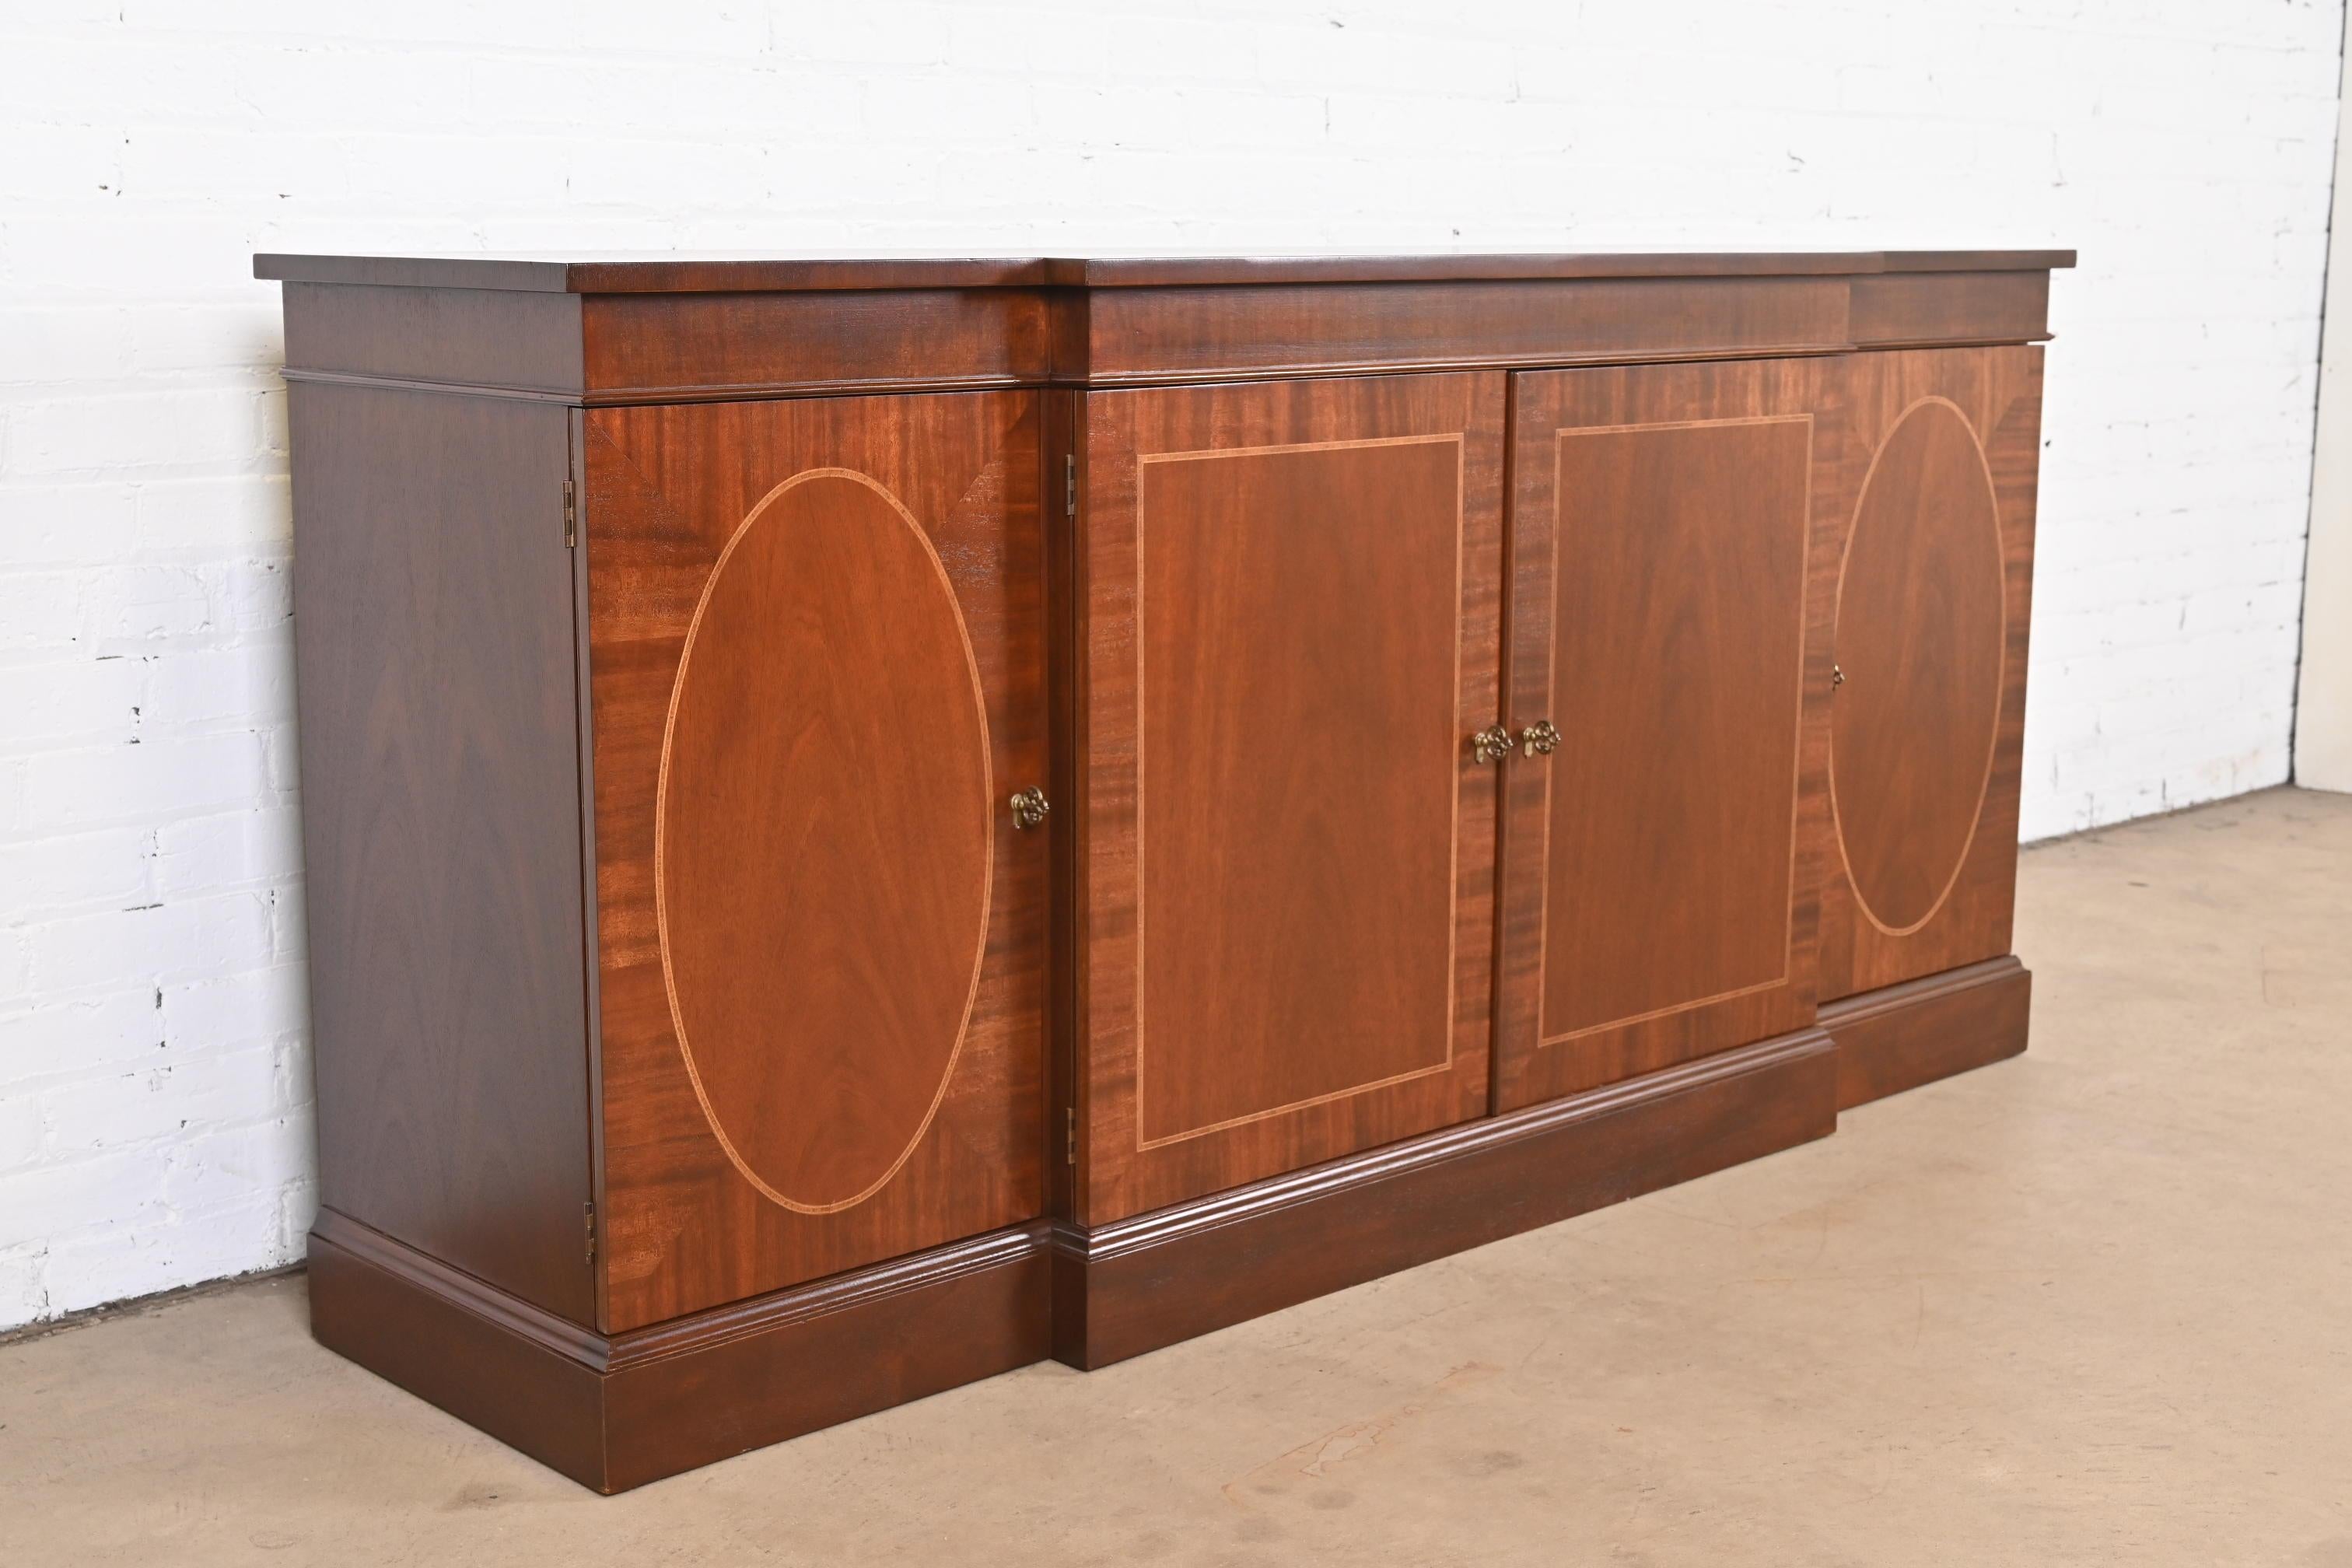 20th Century Baker Furniture Georgian Inlaid Mahogany Sideboard or Bar Cabinet, Refinished